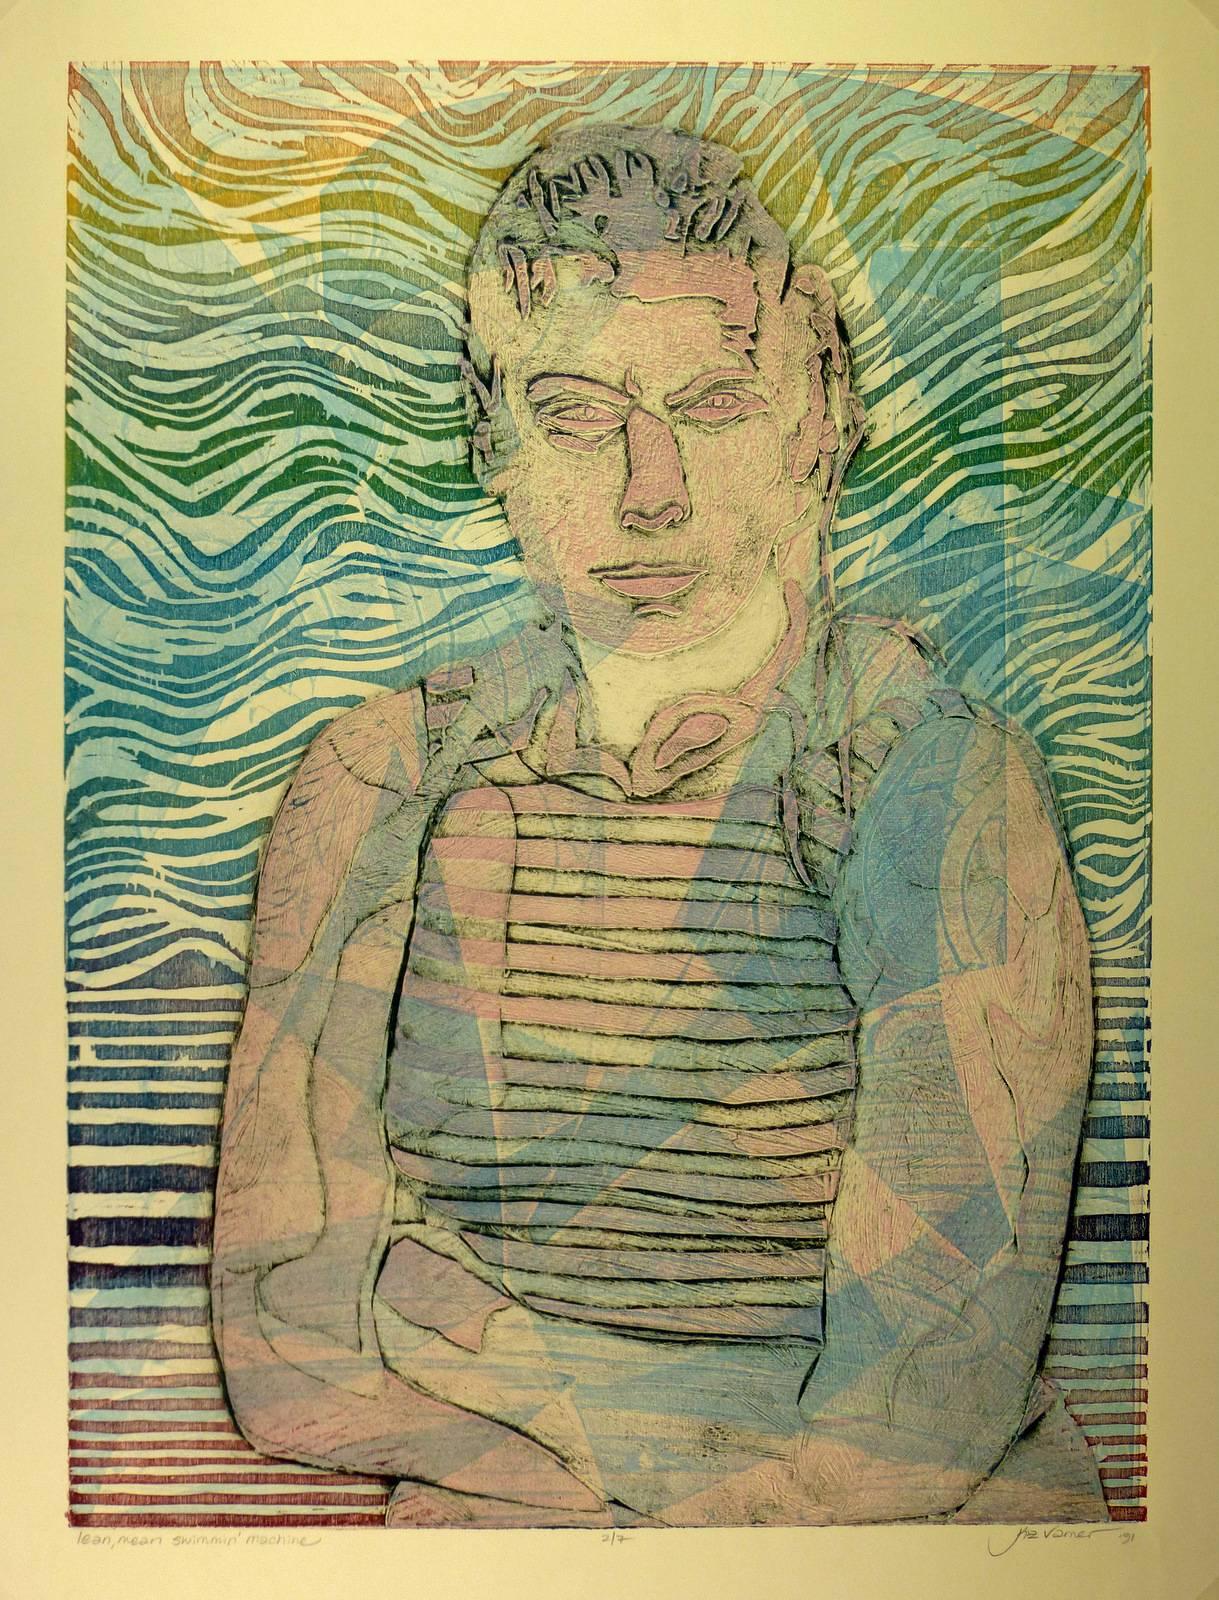 Portrait with Striped Background